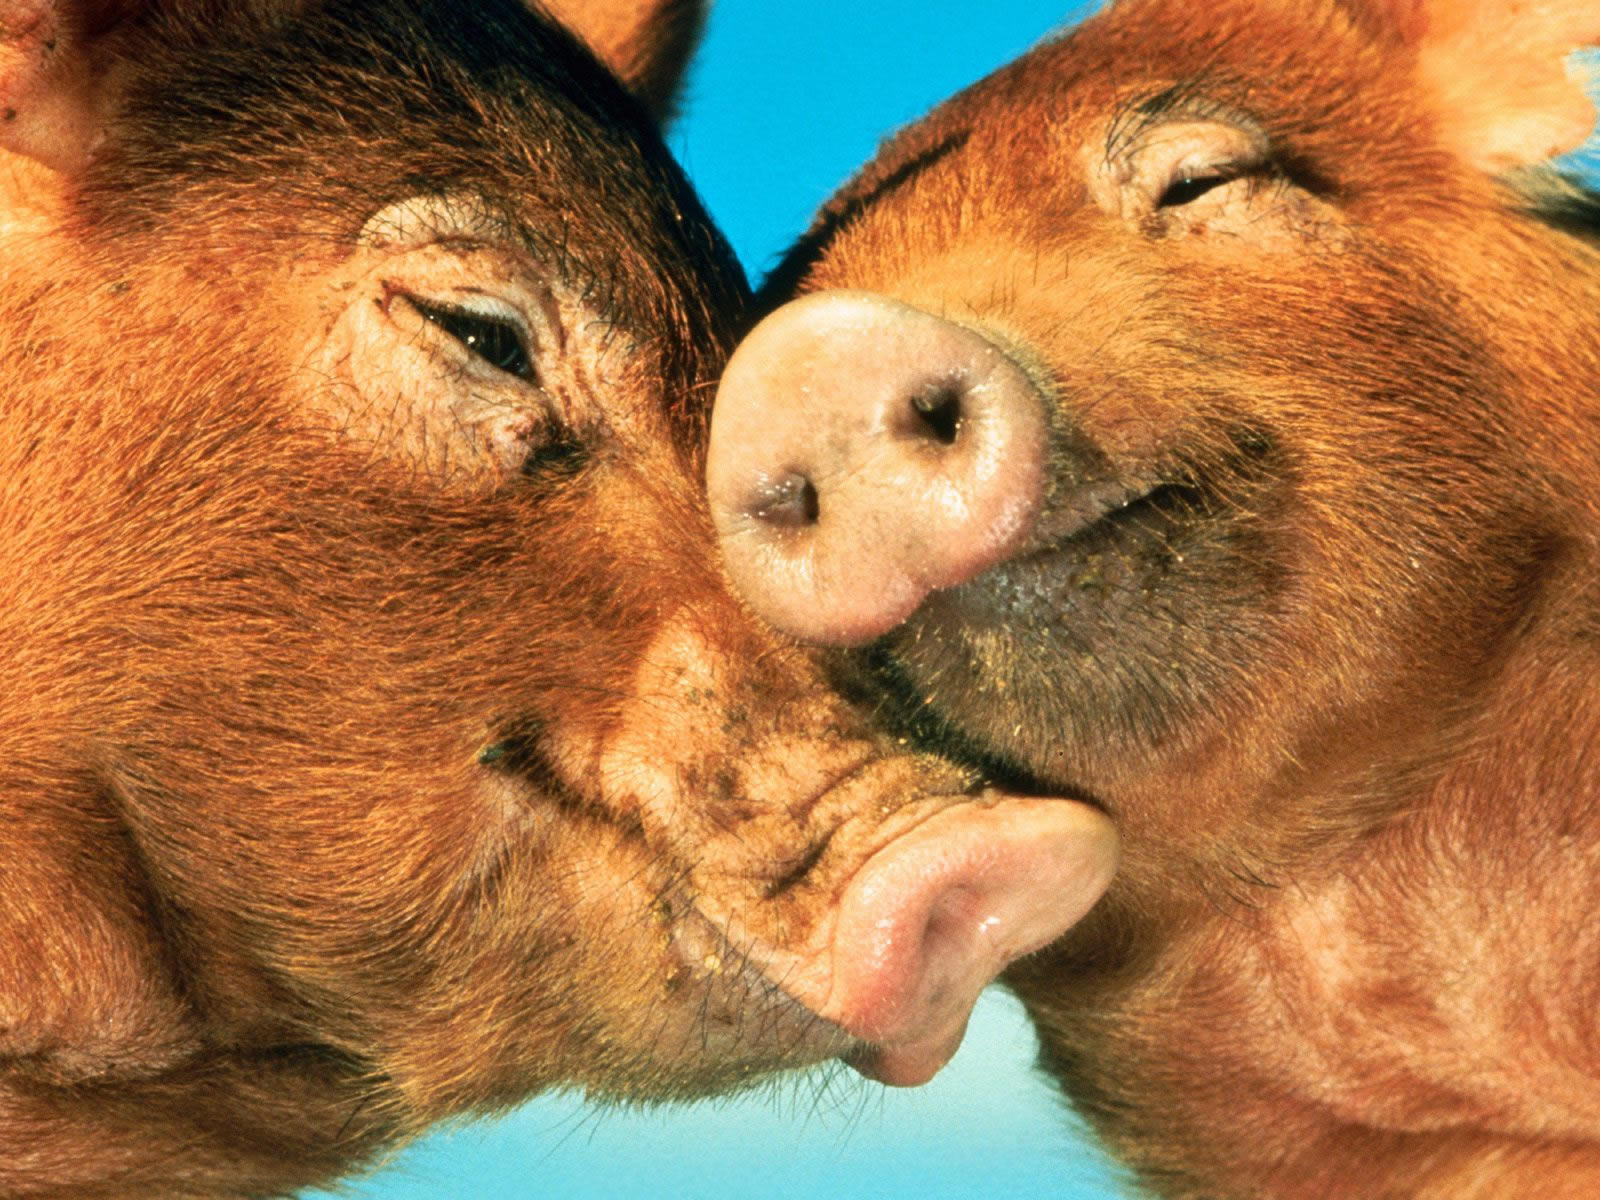 All You Need Is Love - Farm Animals Wallpaper